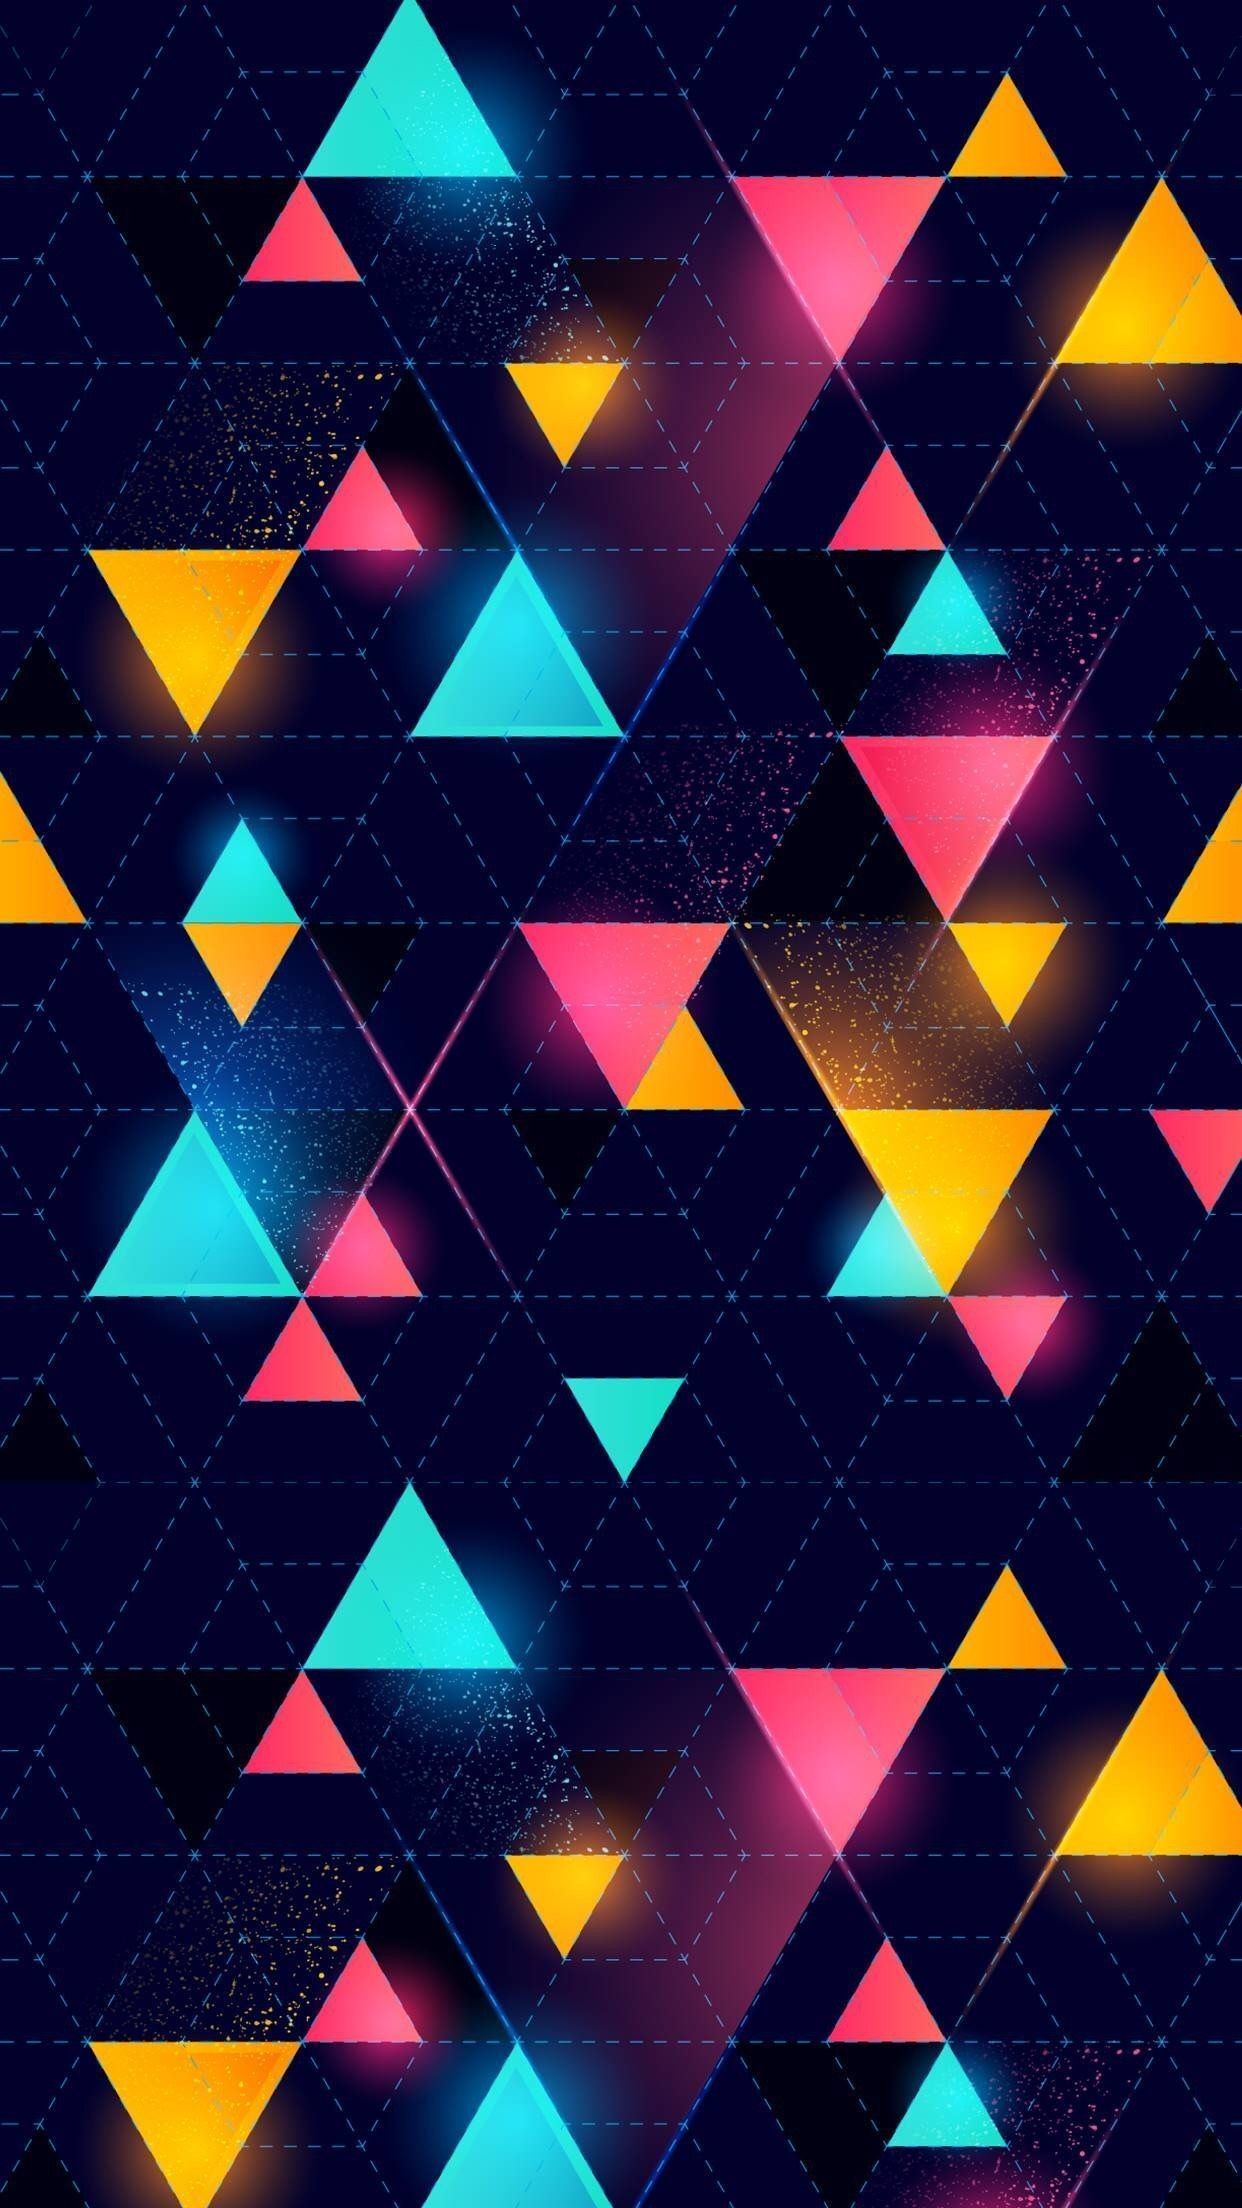 Geometric Abstract iPhone Wallpaper Free Geometric Abstract iPhone Background